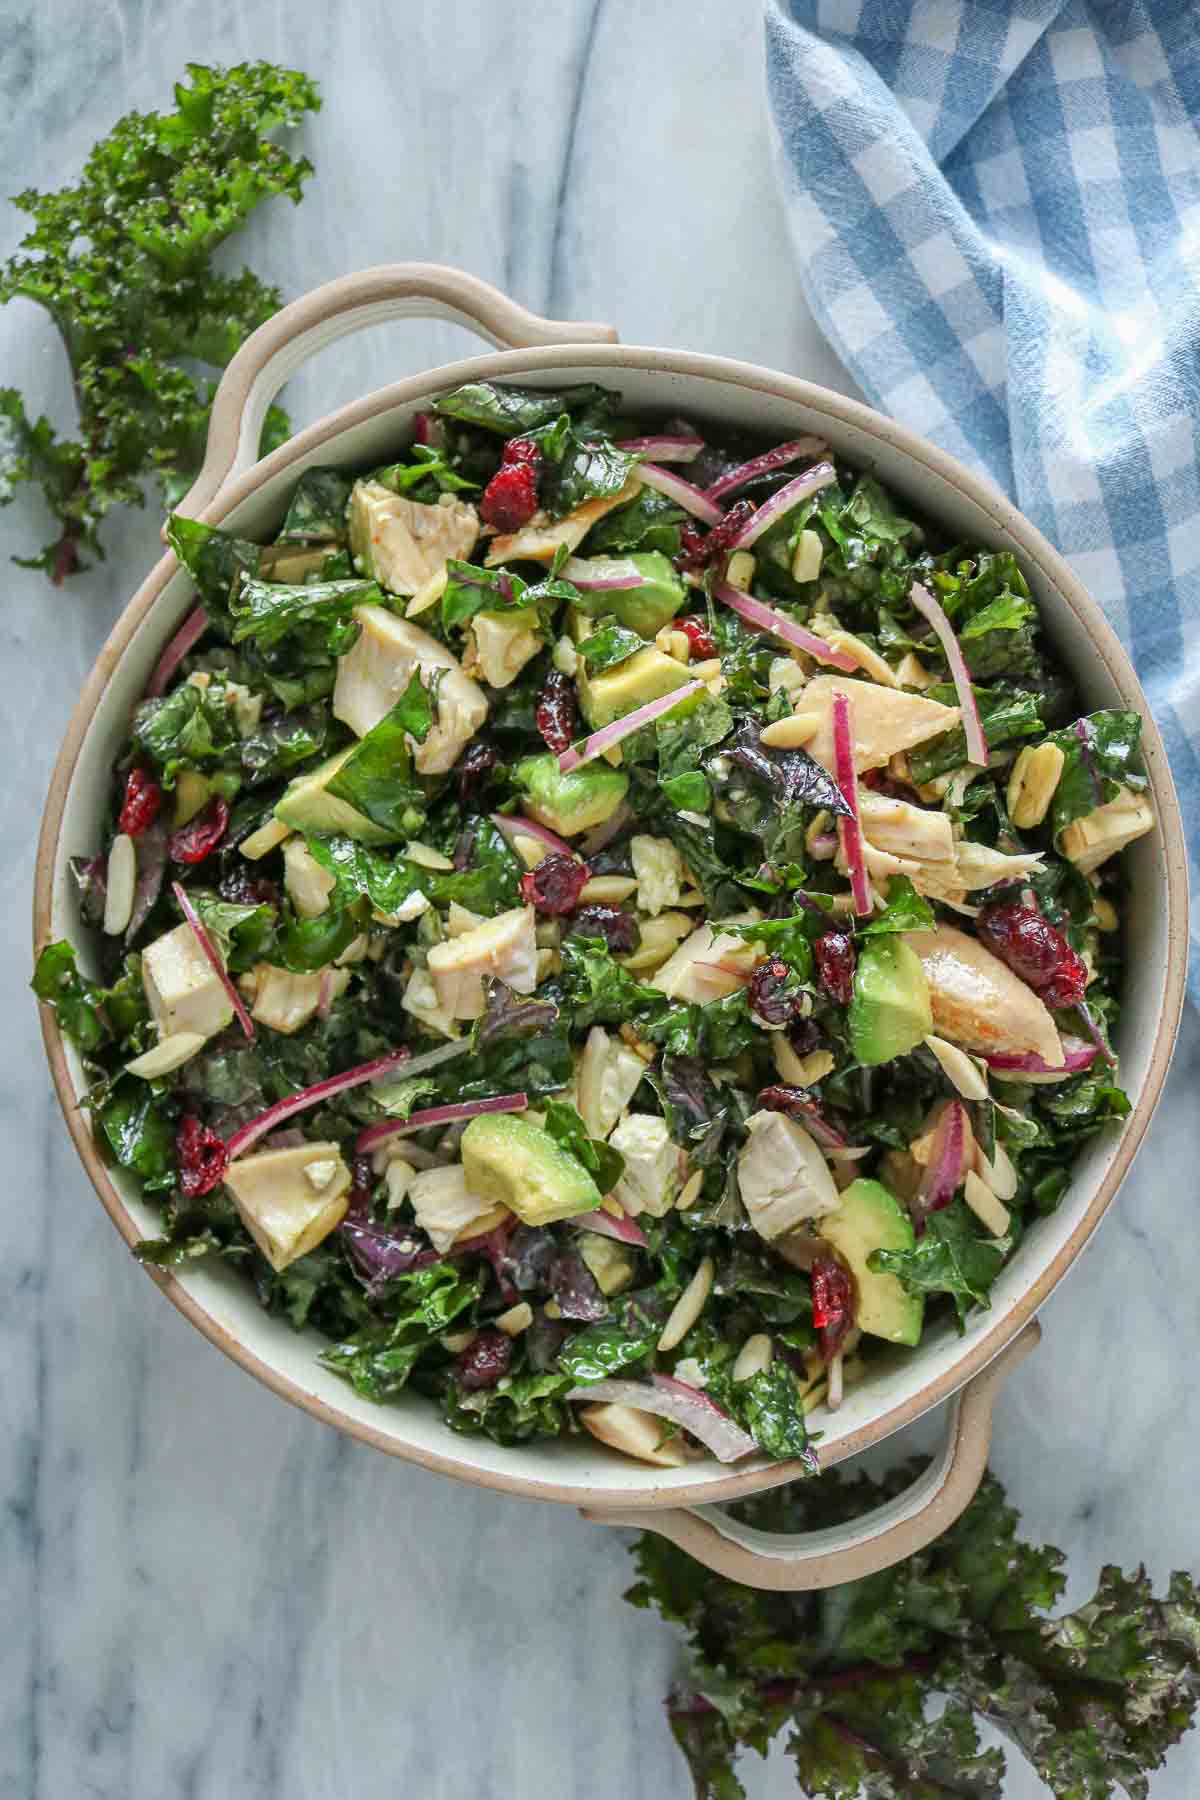 Chicken and kale salad in a serving bowl.